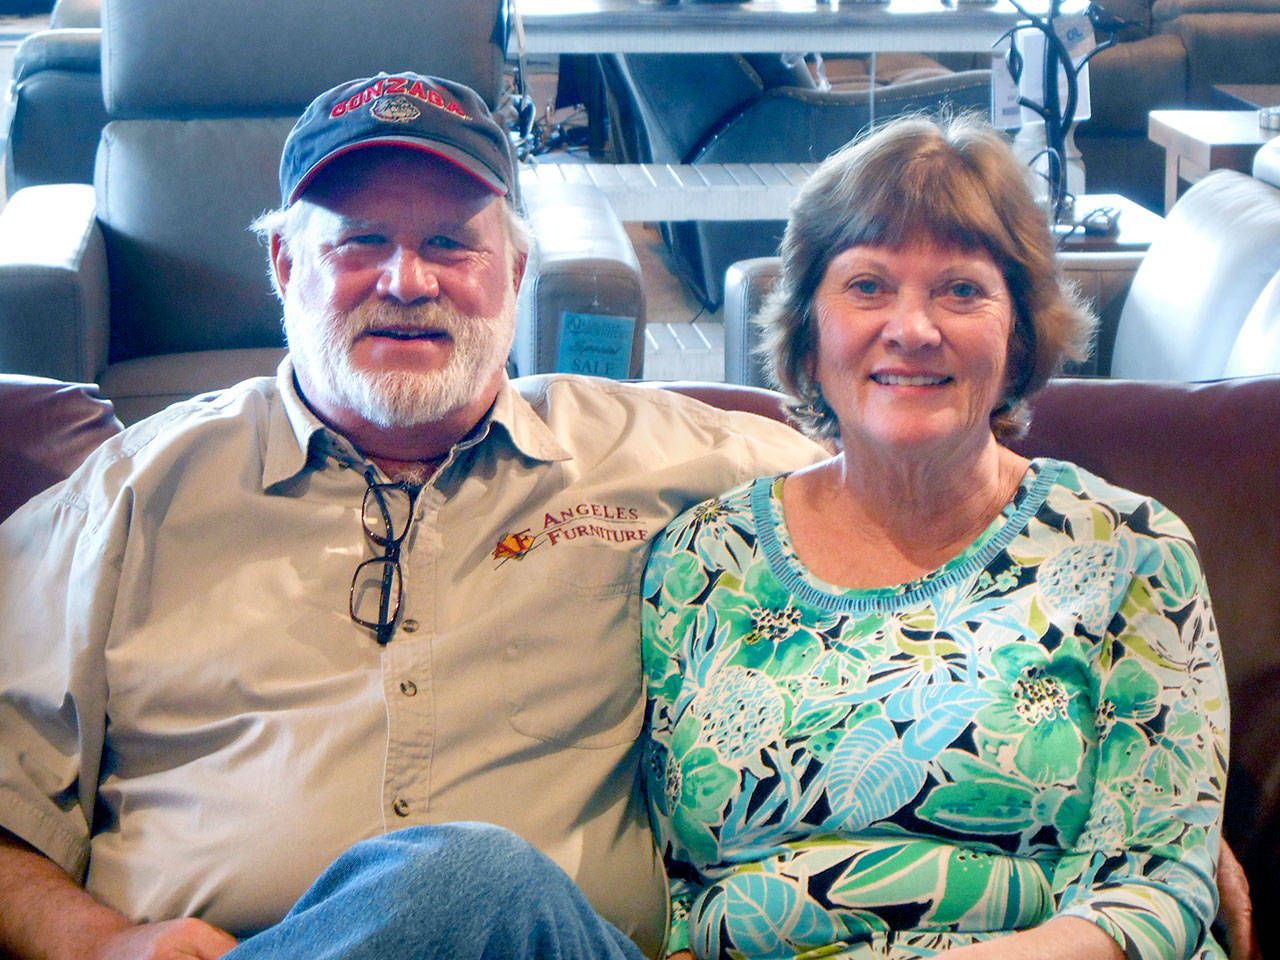 Jack and Patti Gray have owned Angeles Furniture since 1986.